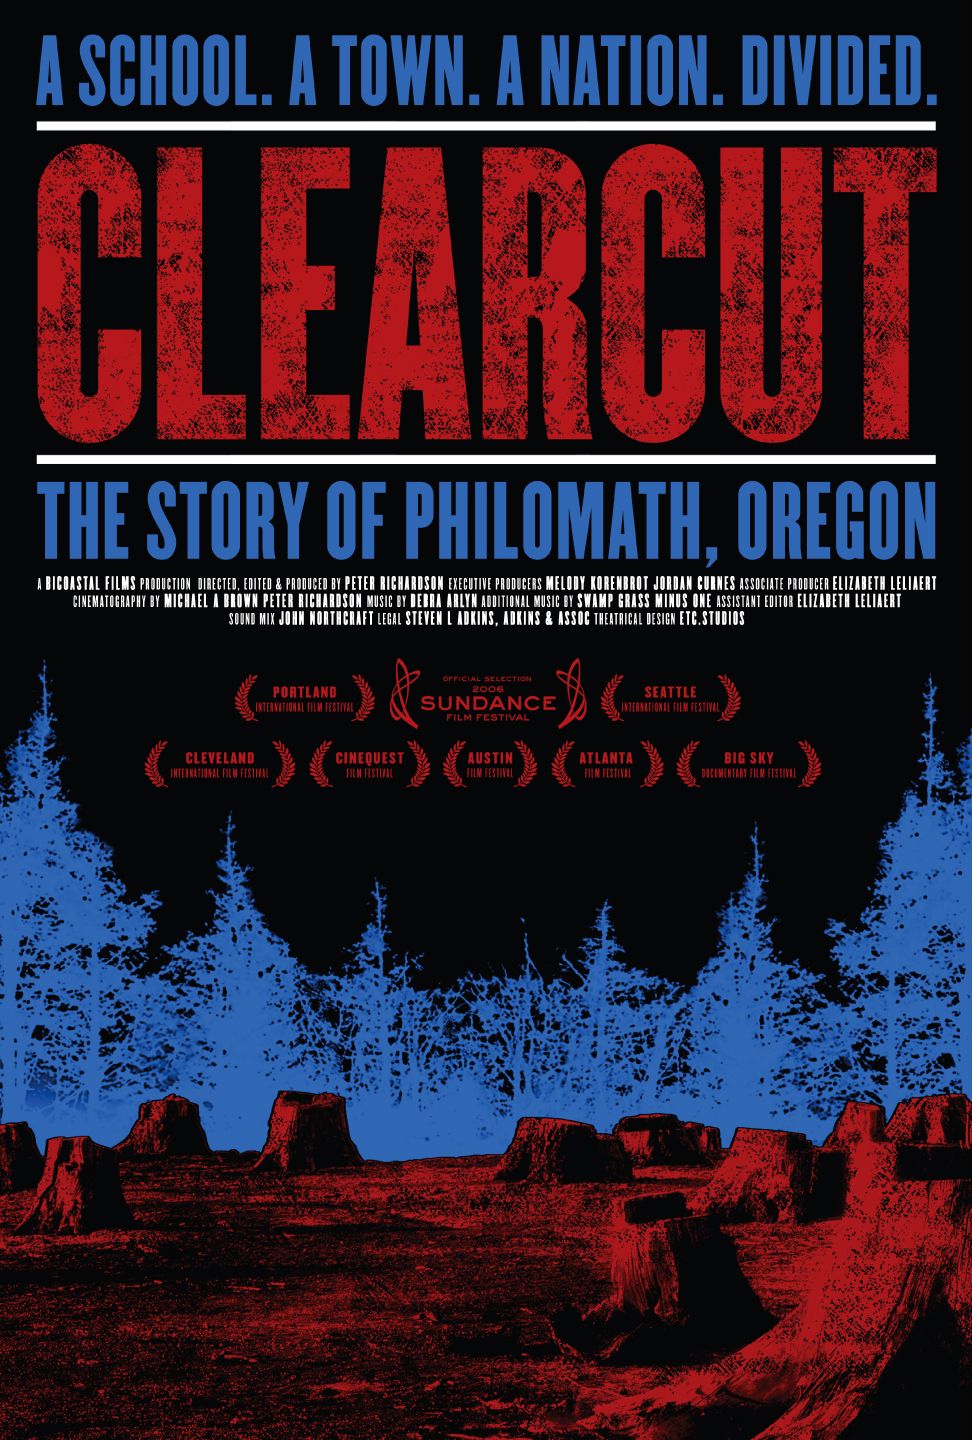 Extra Large Movie Poster Image for Clear Cut: The Story of Philomath, Oregon 